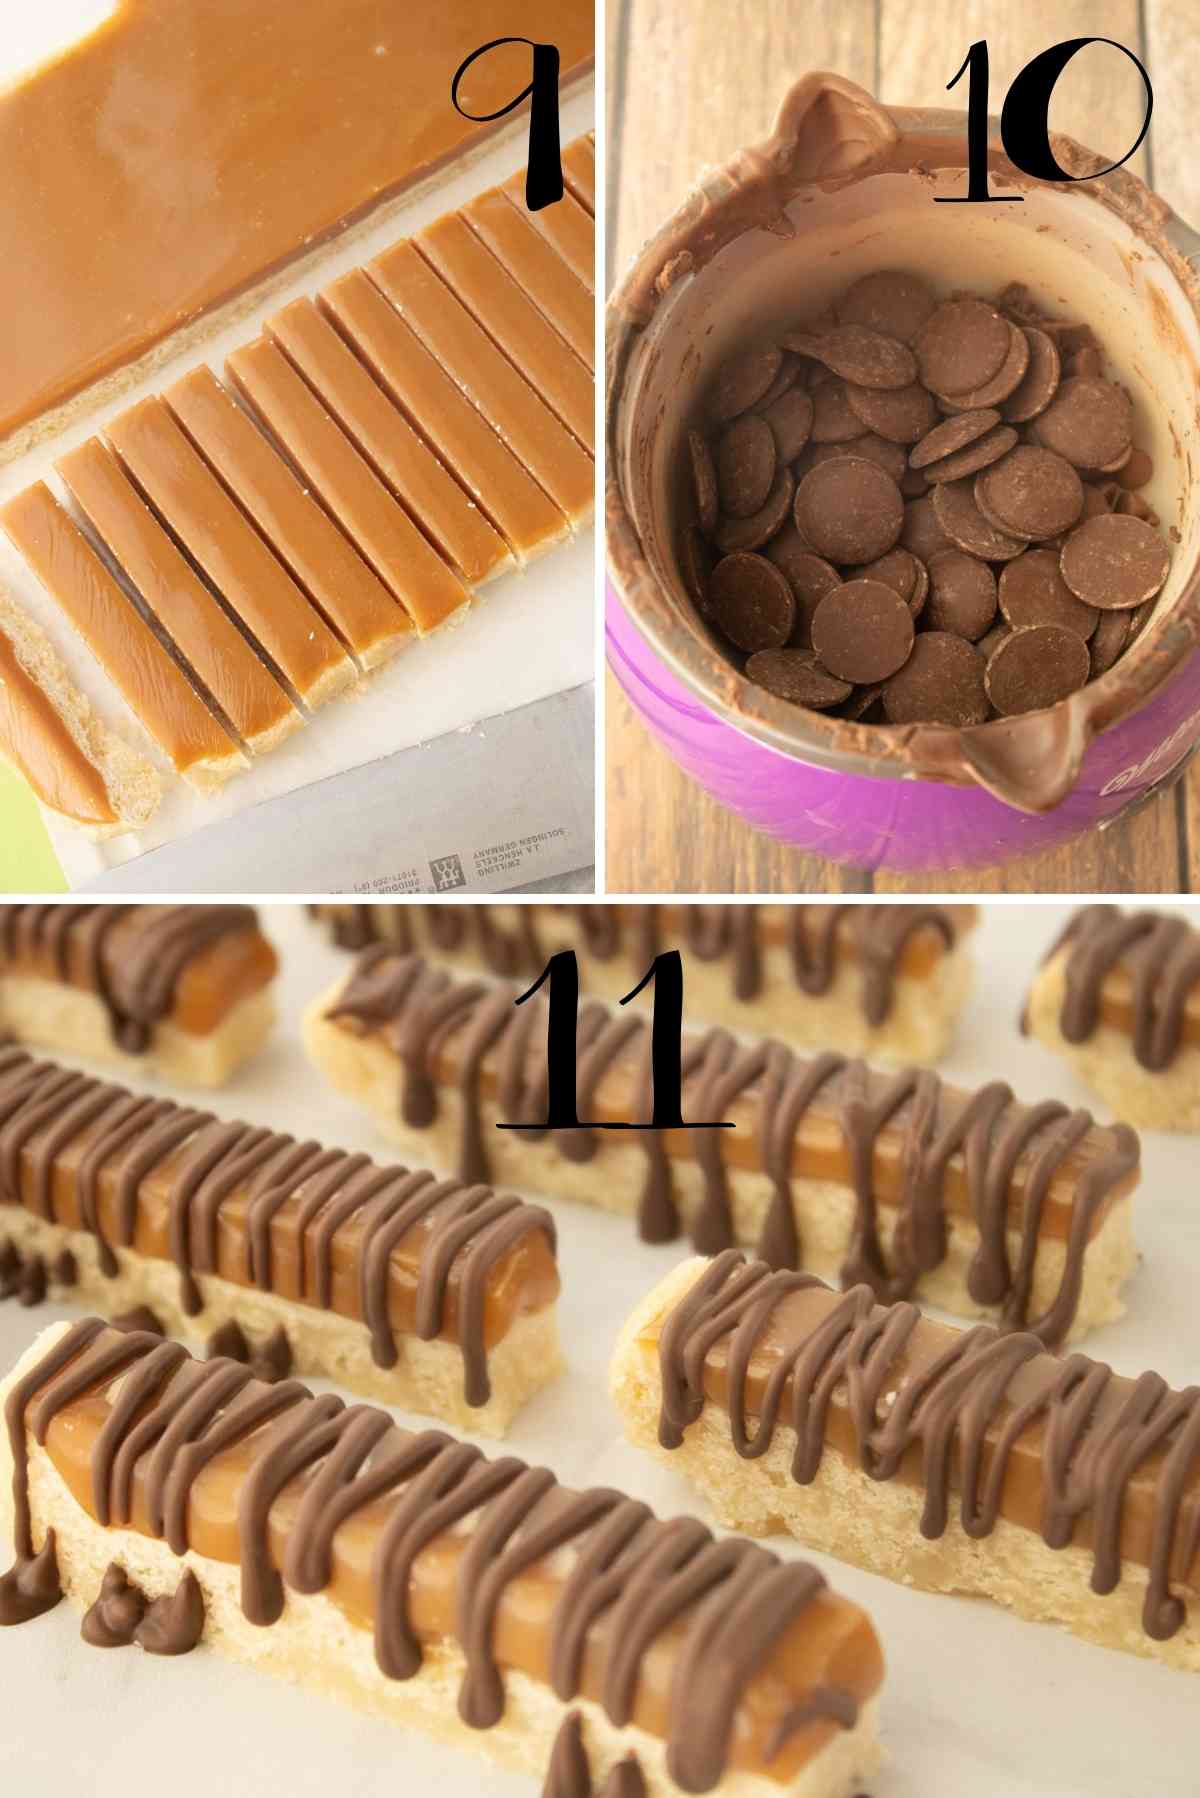 Cut into twix bars and drizzle with melted chocolate.